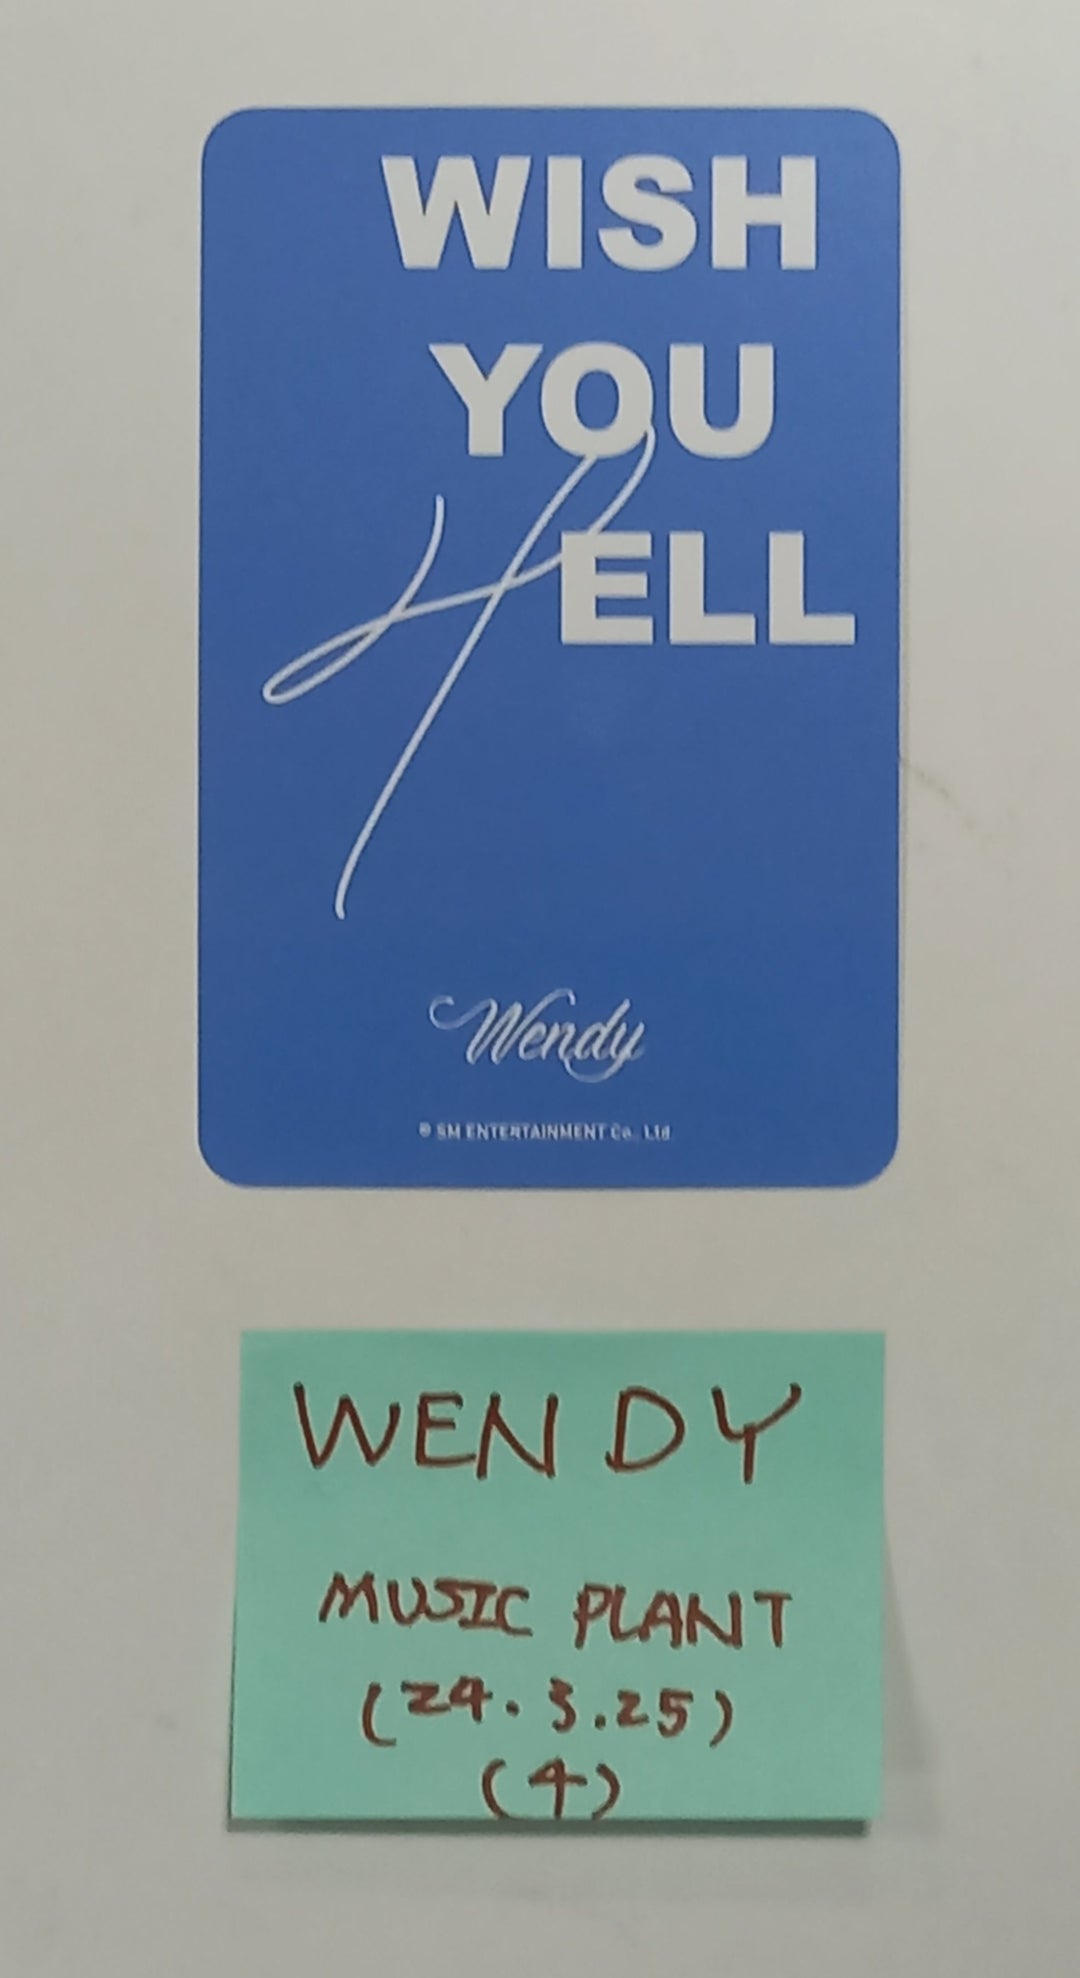 Wendy (Of Red Velvet) "Wish You Hell" - Music Plant Fansign Event Photocard [24.3.25]